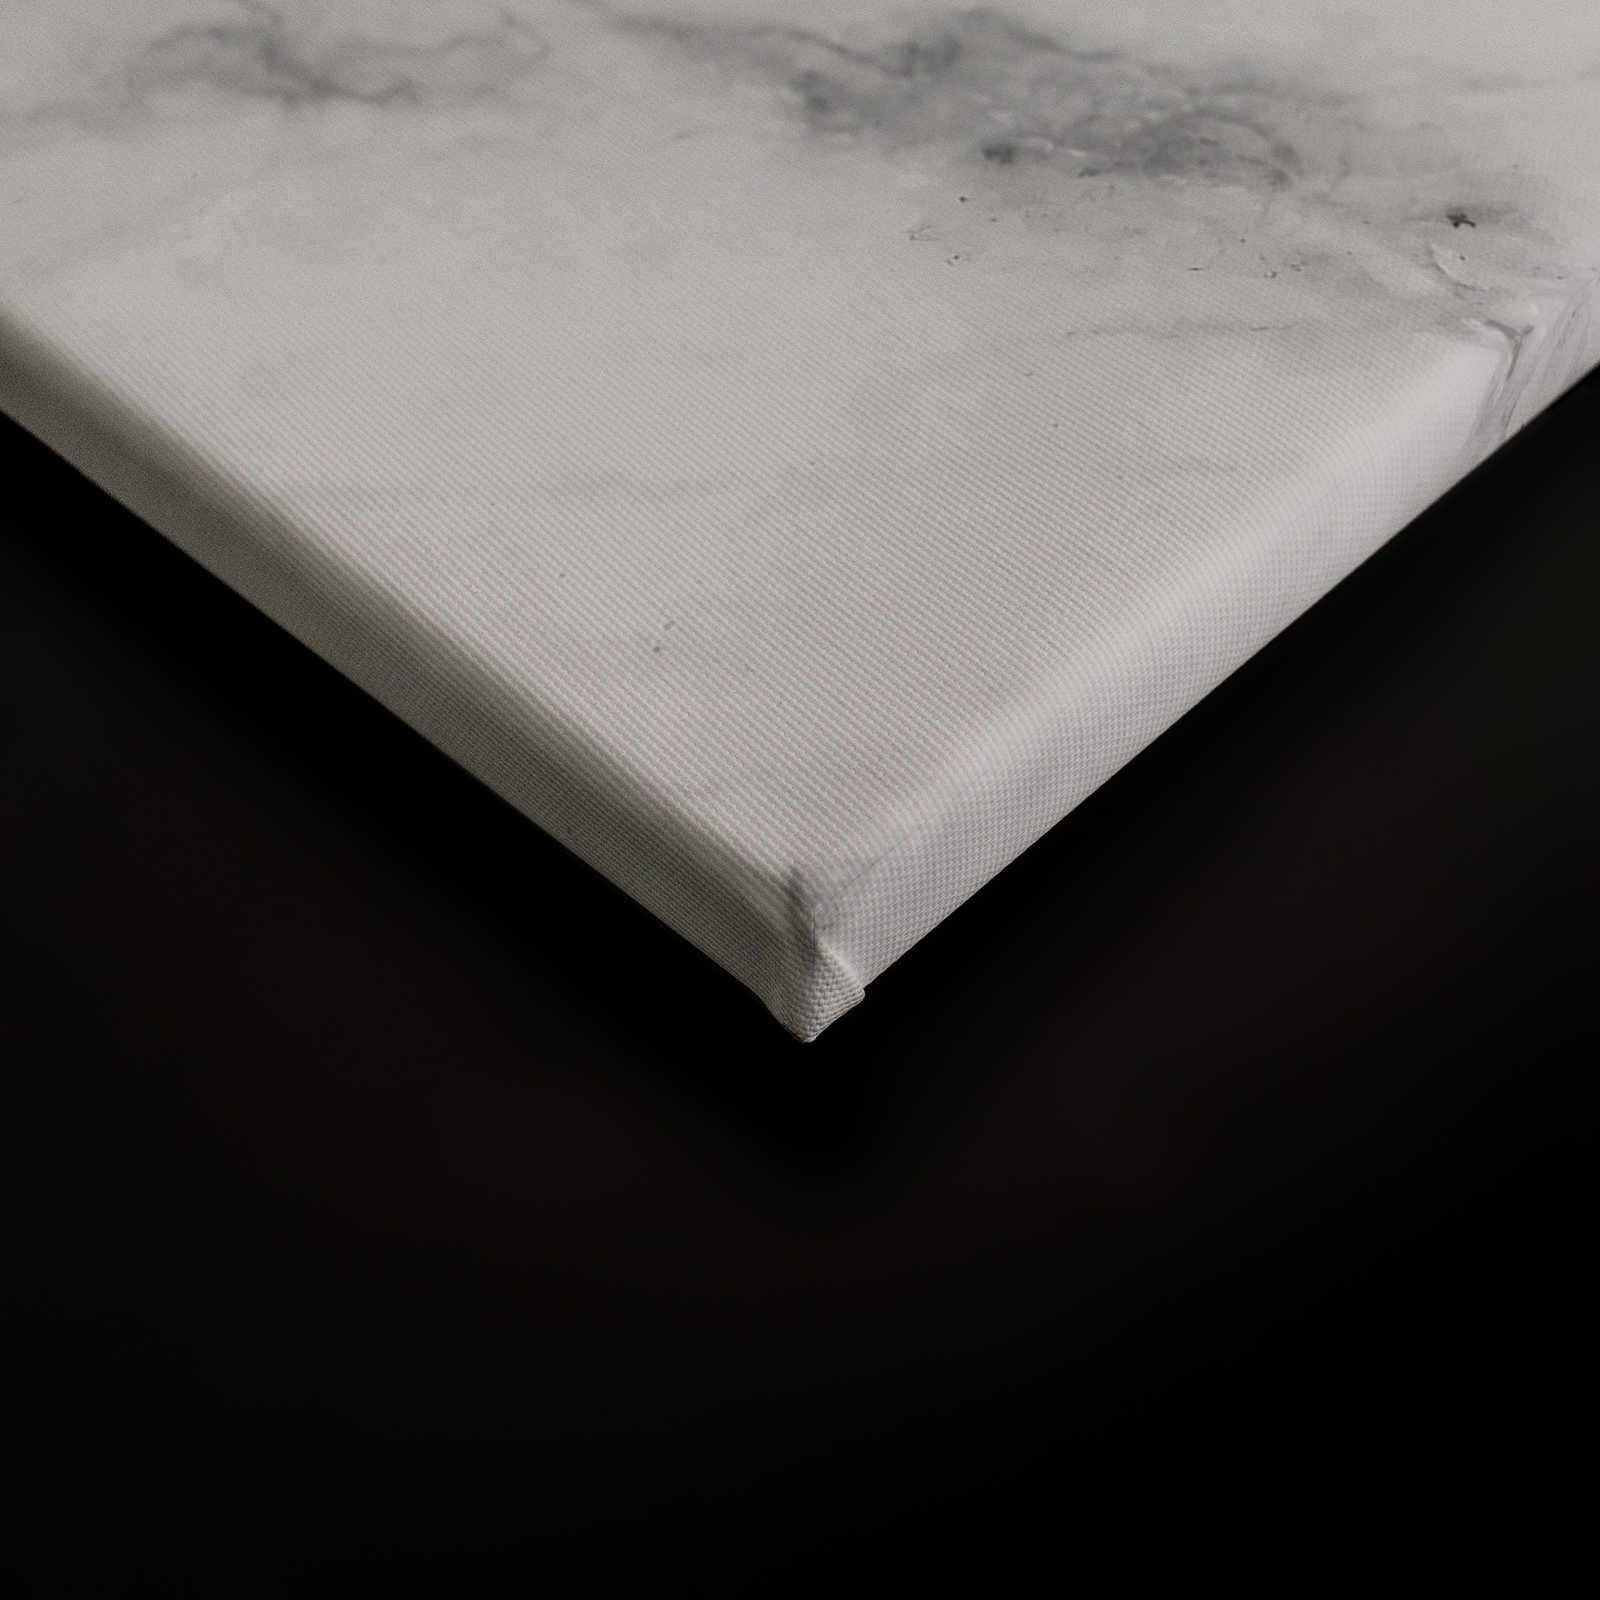             Black and White Canvas Painting Marble with Nature Details - 1.20 m x 0.80 m
        